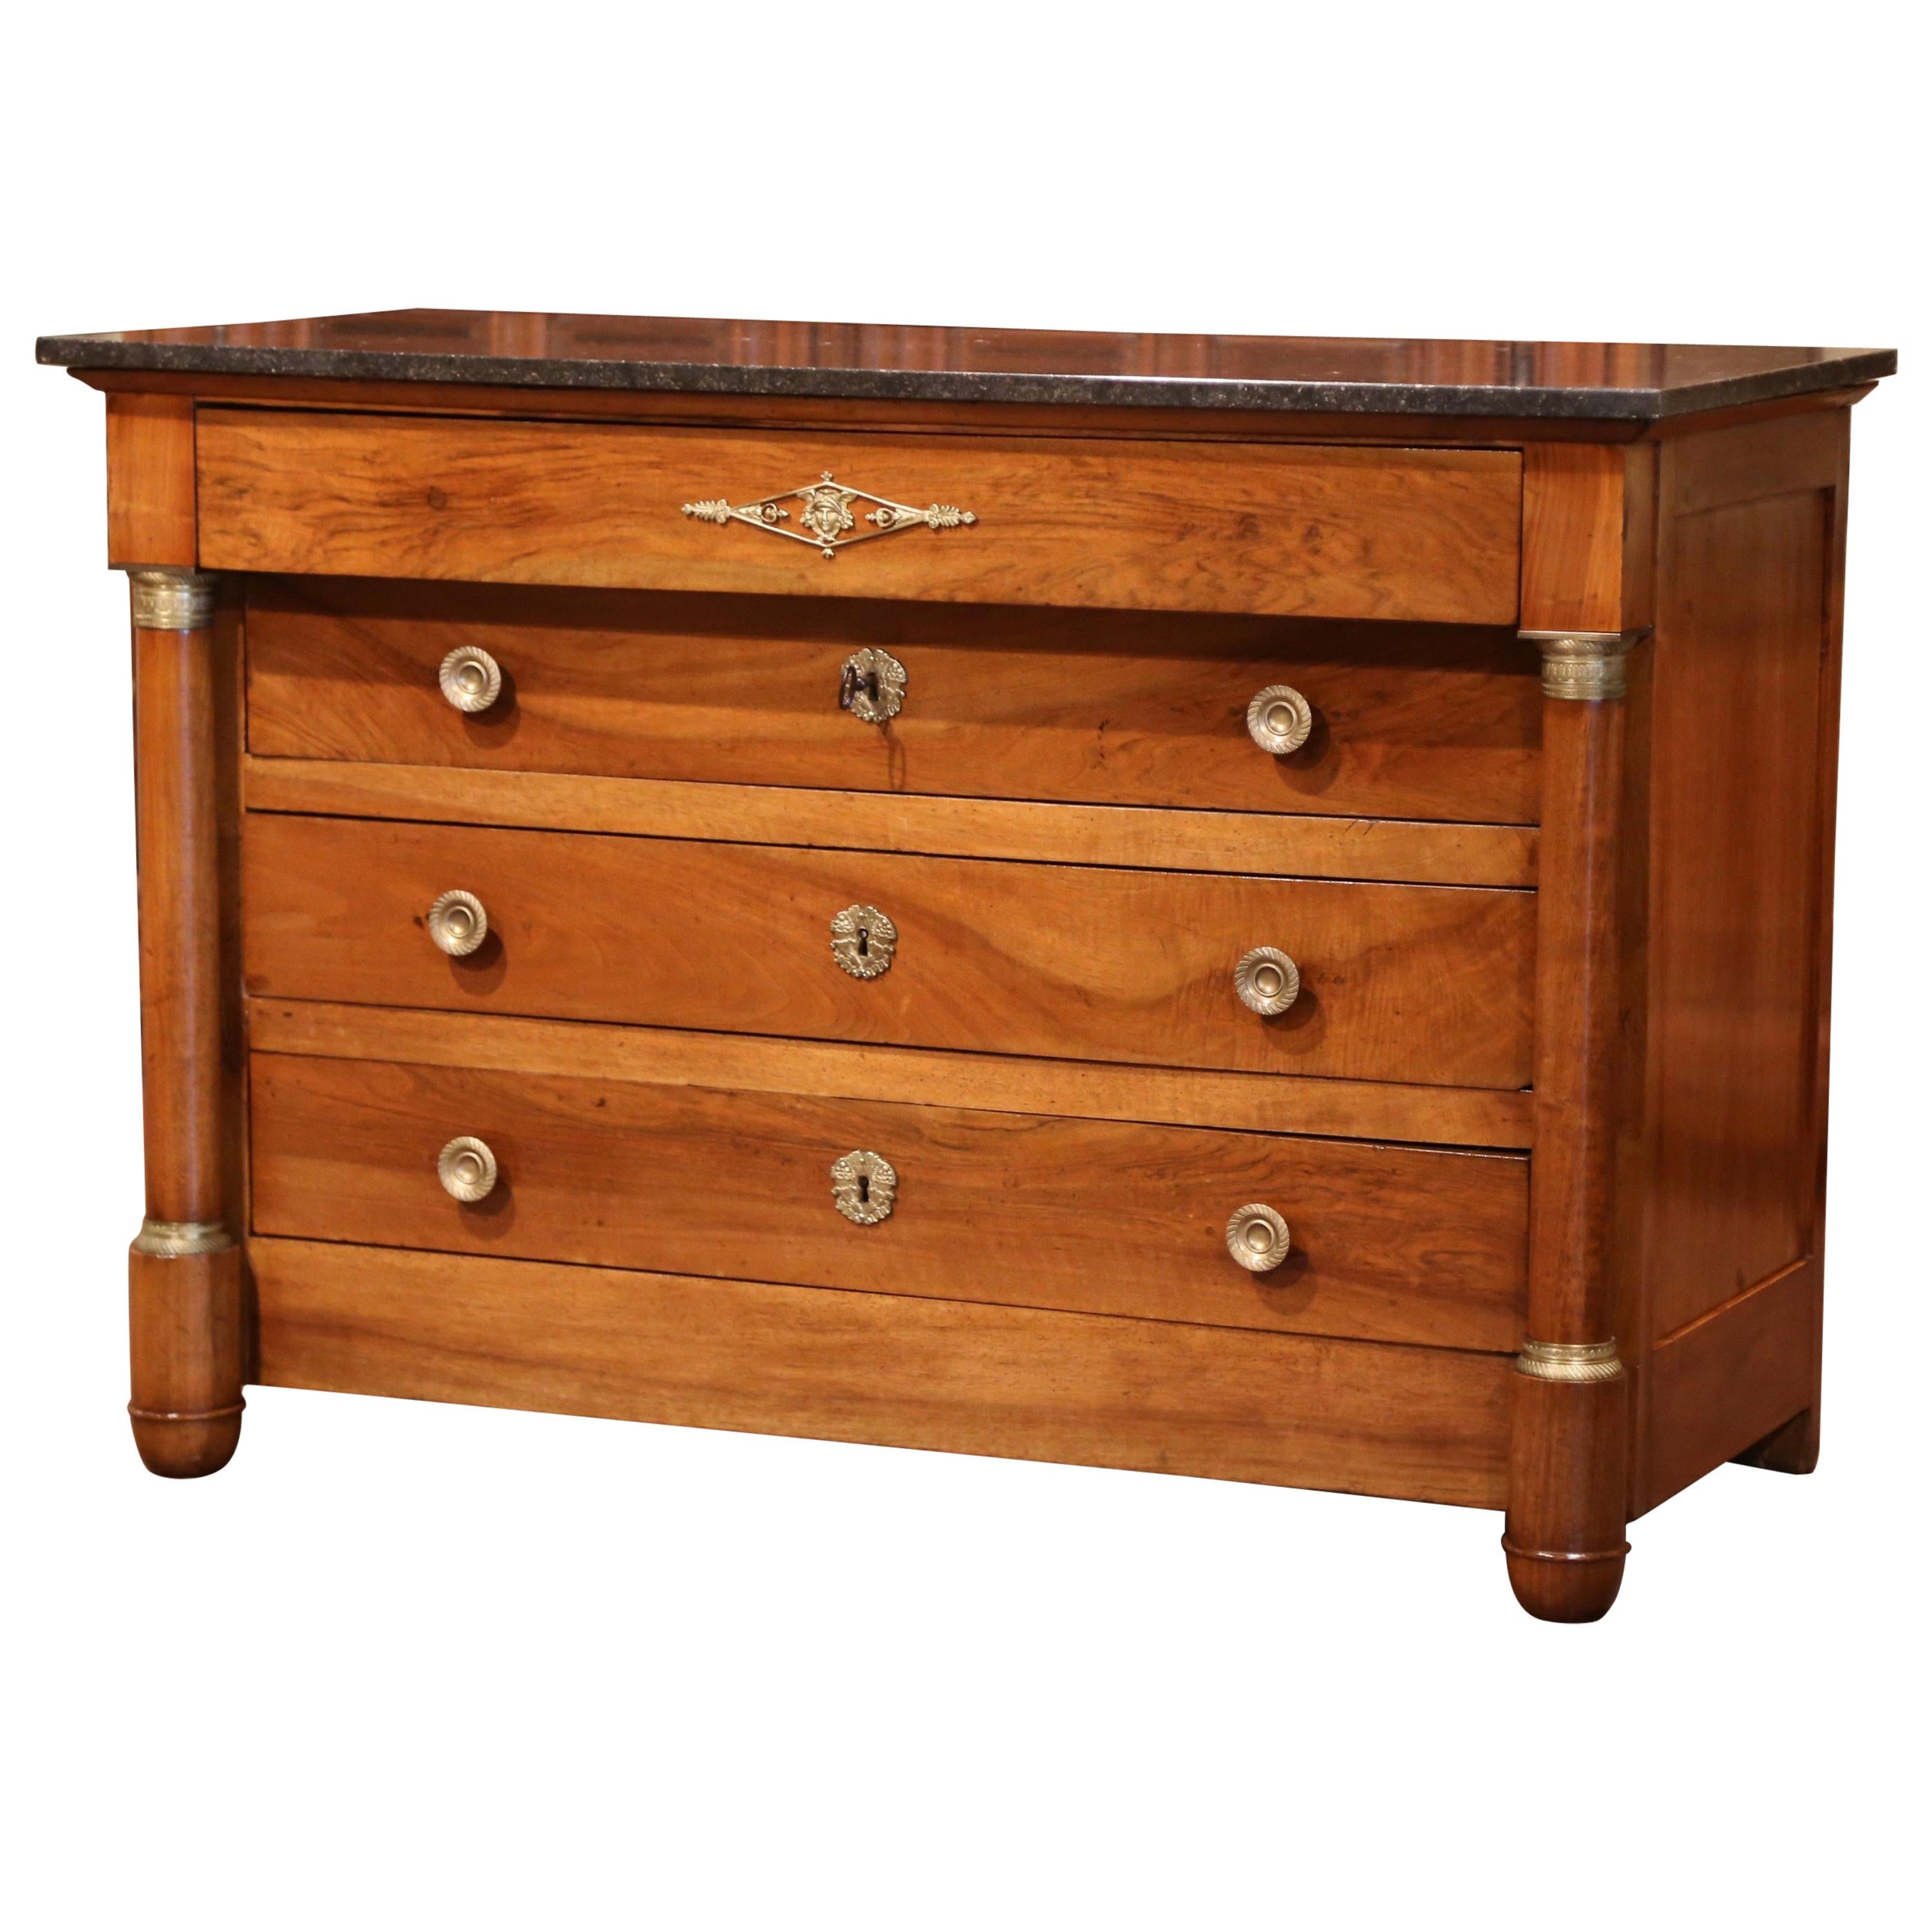 19th Century French Empire Walnut Commode Chest of Drawers with Black Marble Top